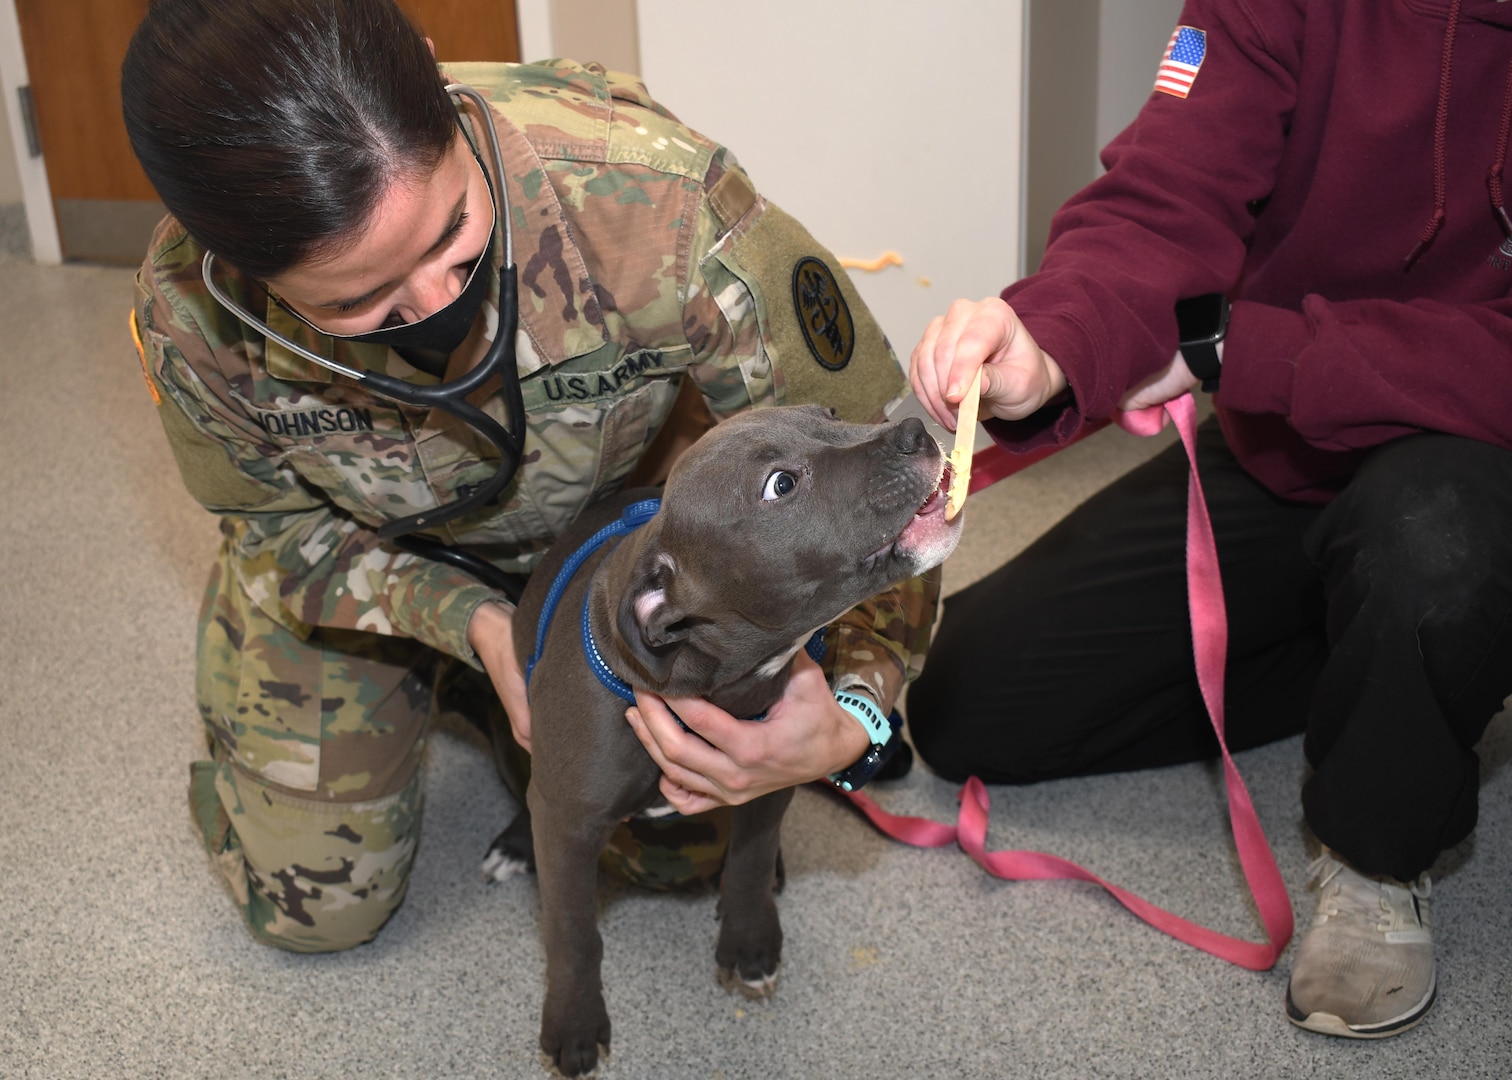 FORT DRUM, N.Y. – Capt. Breanna Johnson, the Fort Drum Veterinary Services branch chief, conducts a wellness check on a dog prior to administering vaccines during the Fort Drum Veterinary Treatment Facility drive-up vaccine clinic on Fort Drum, N.Y., Dec. 28.  The day-long event provided much-needed inoculations and wellness exams to pets while minimizing person-to-person contact.